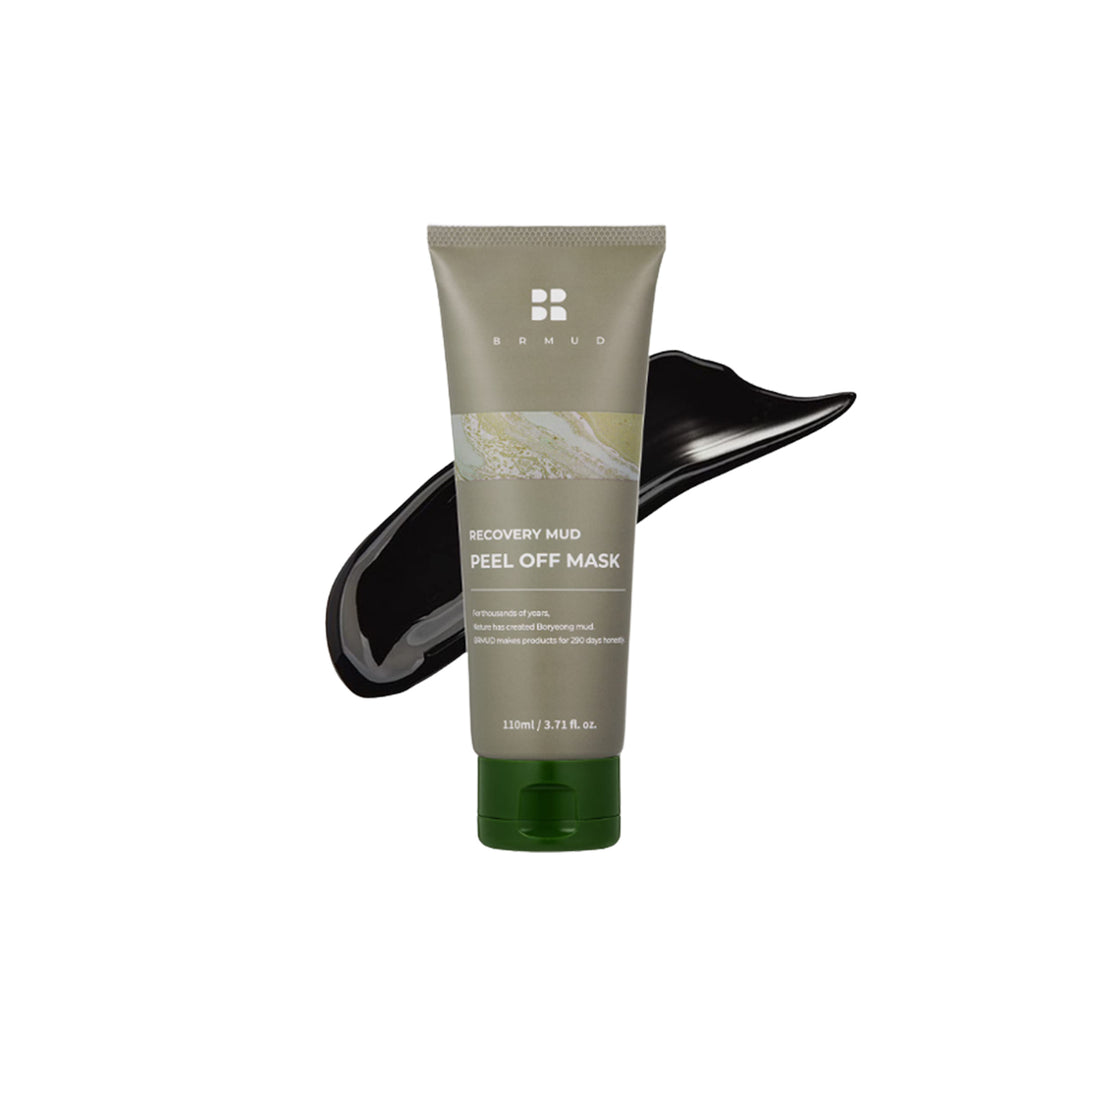 Brmud Recovery Mud Peel Off Mask